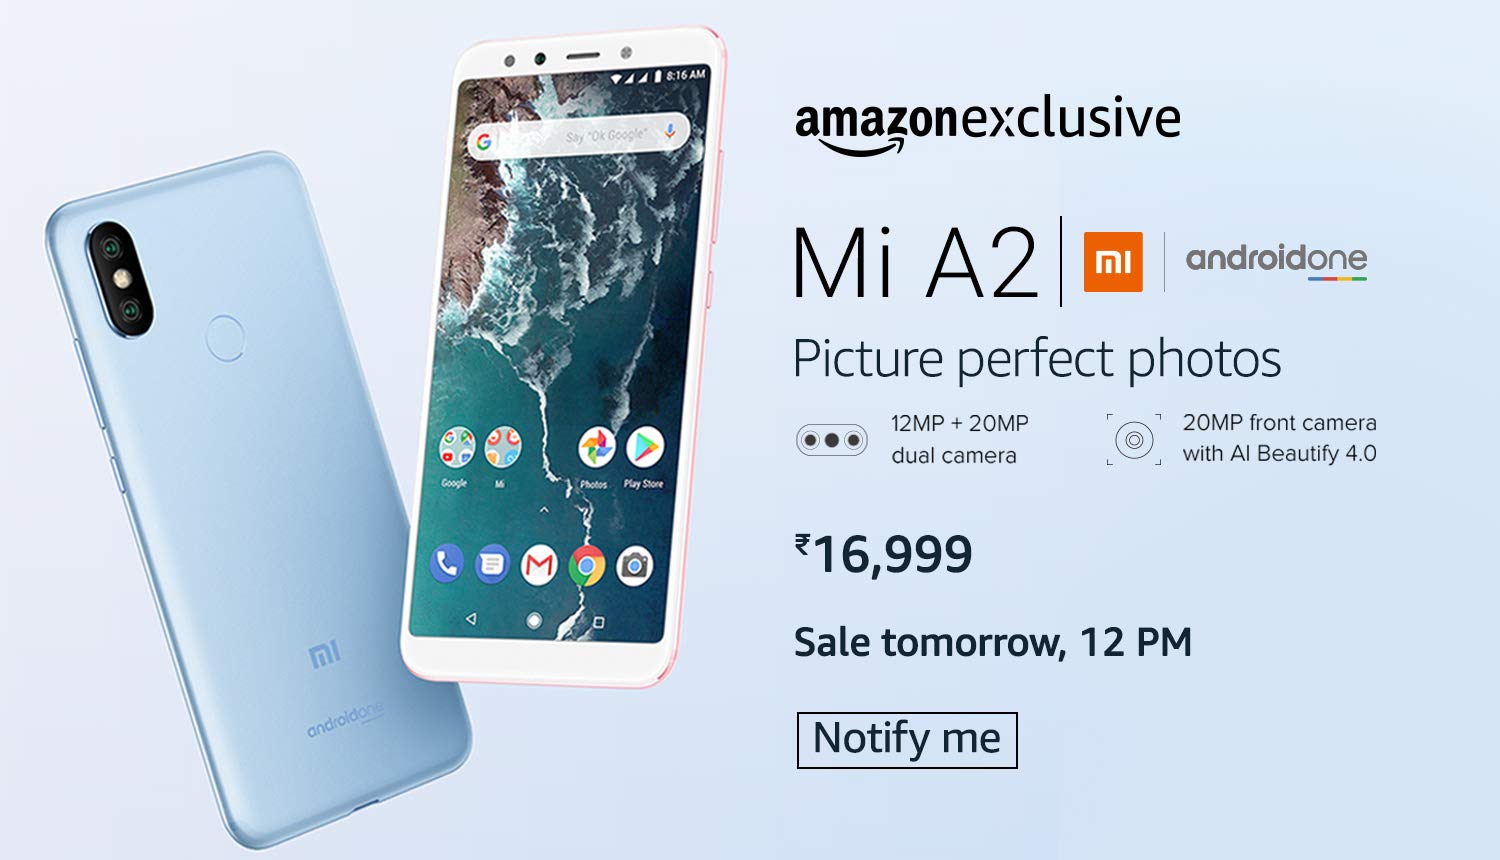 Buy the Mi A2 Smartphone Online at Amazon India